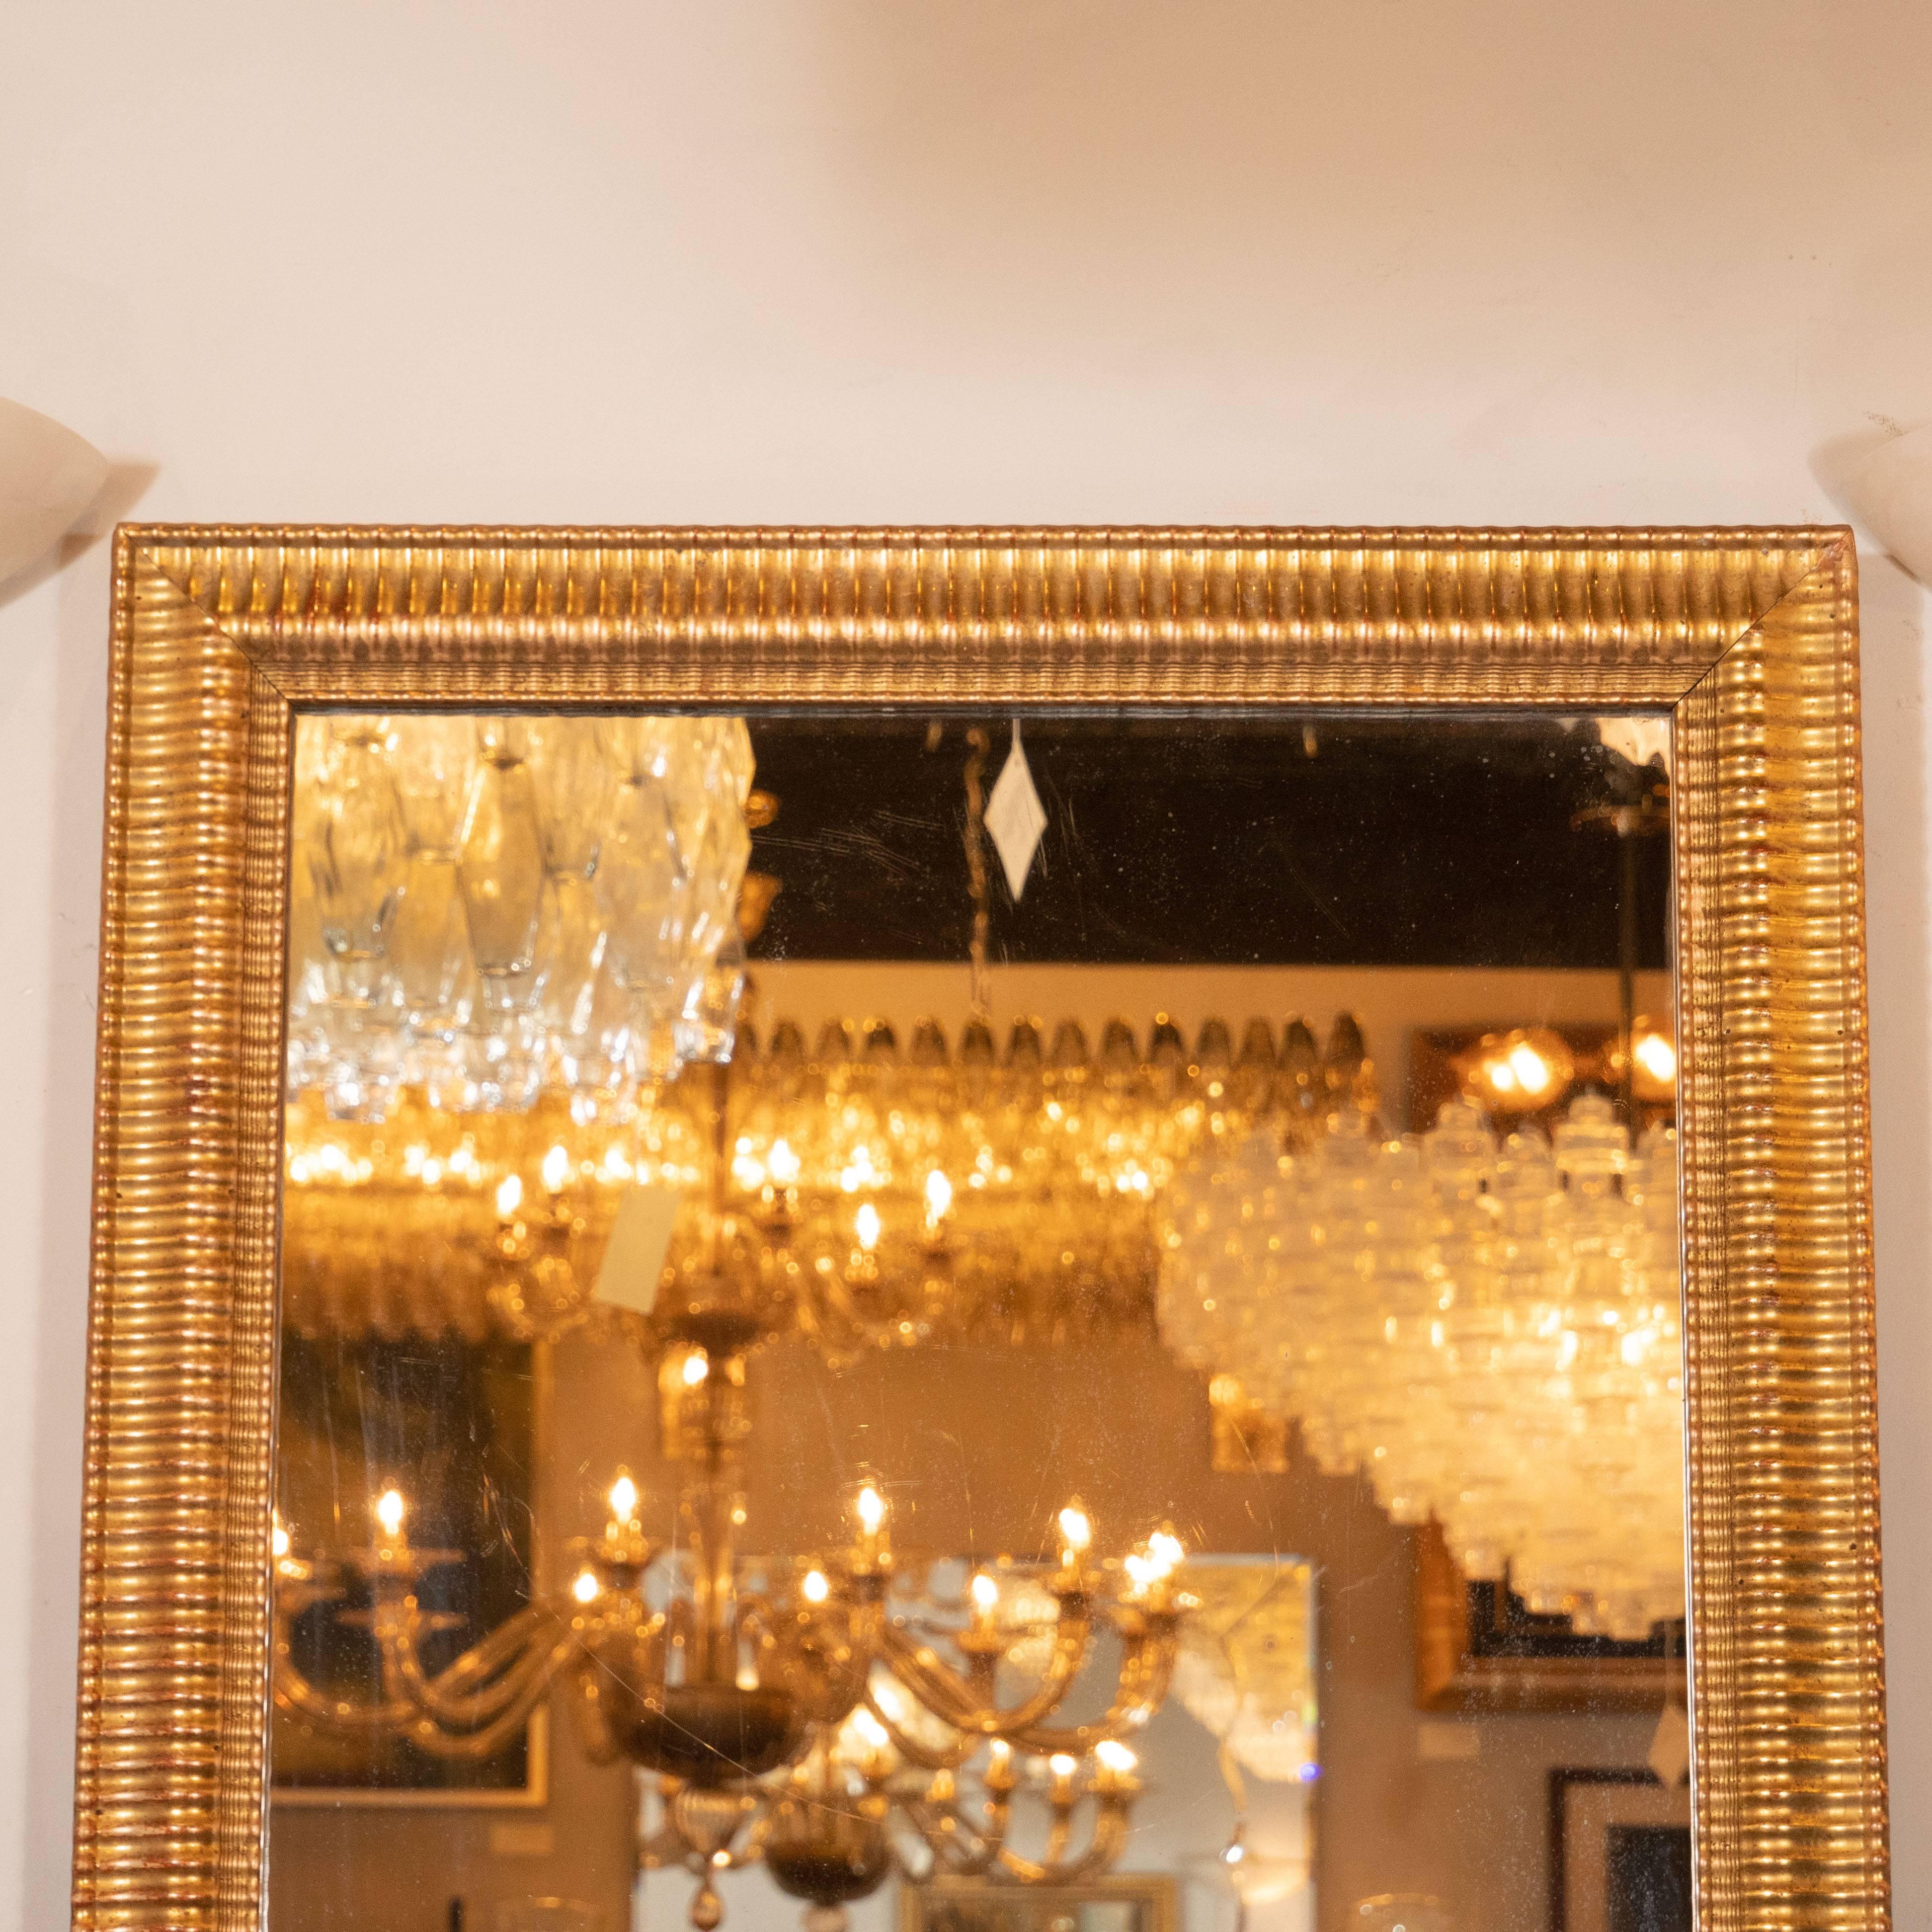 This refined and elegant mirror was realized in the United States, circa 1950. It features a rectangular frame, meticulously hand embellished with horizontal fluted detailing and undulating fronts, lending the frame a subtle sculptural sensibility.